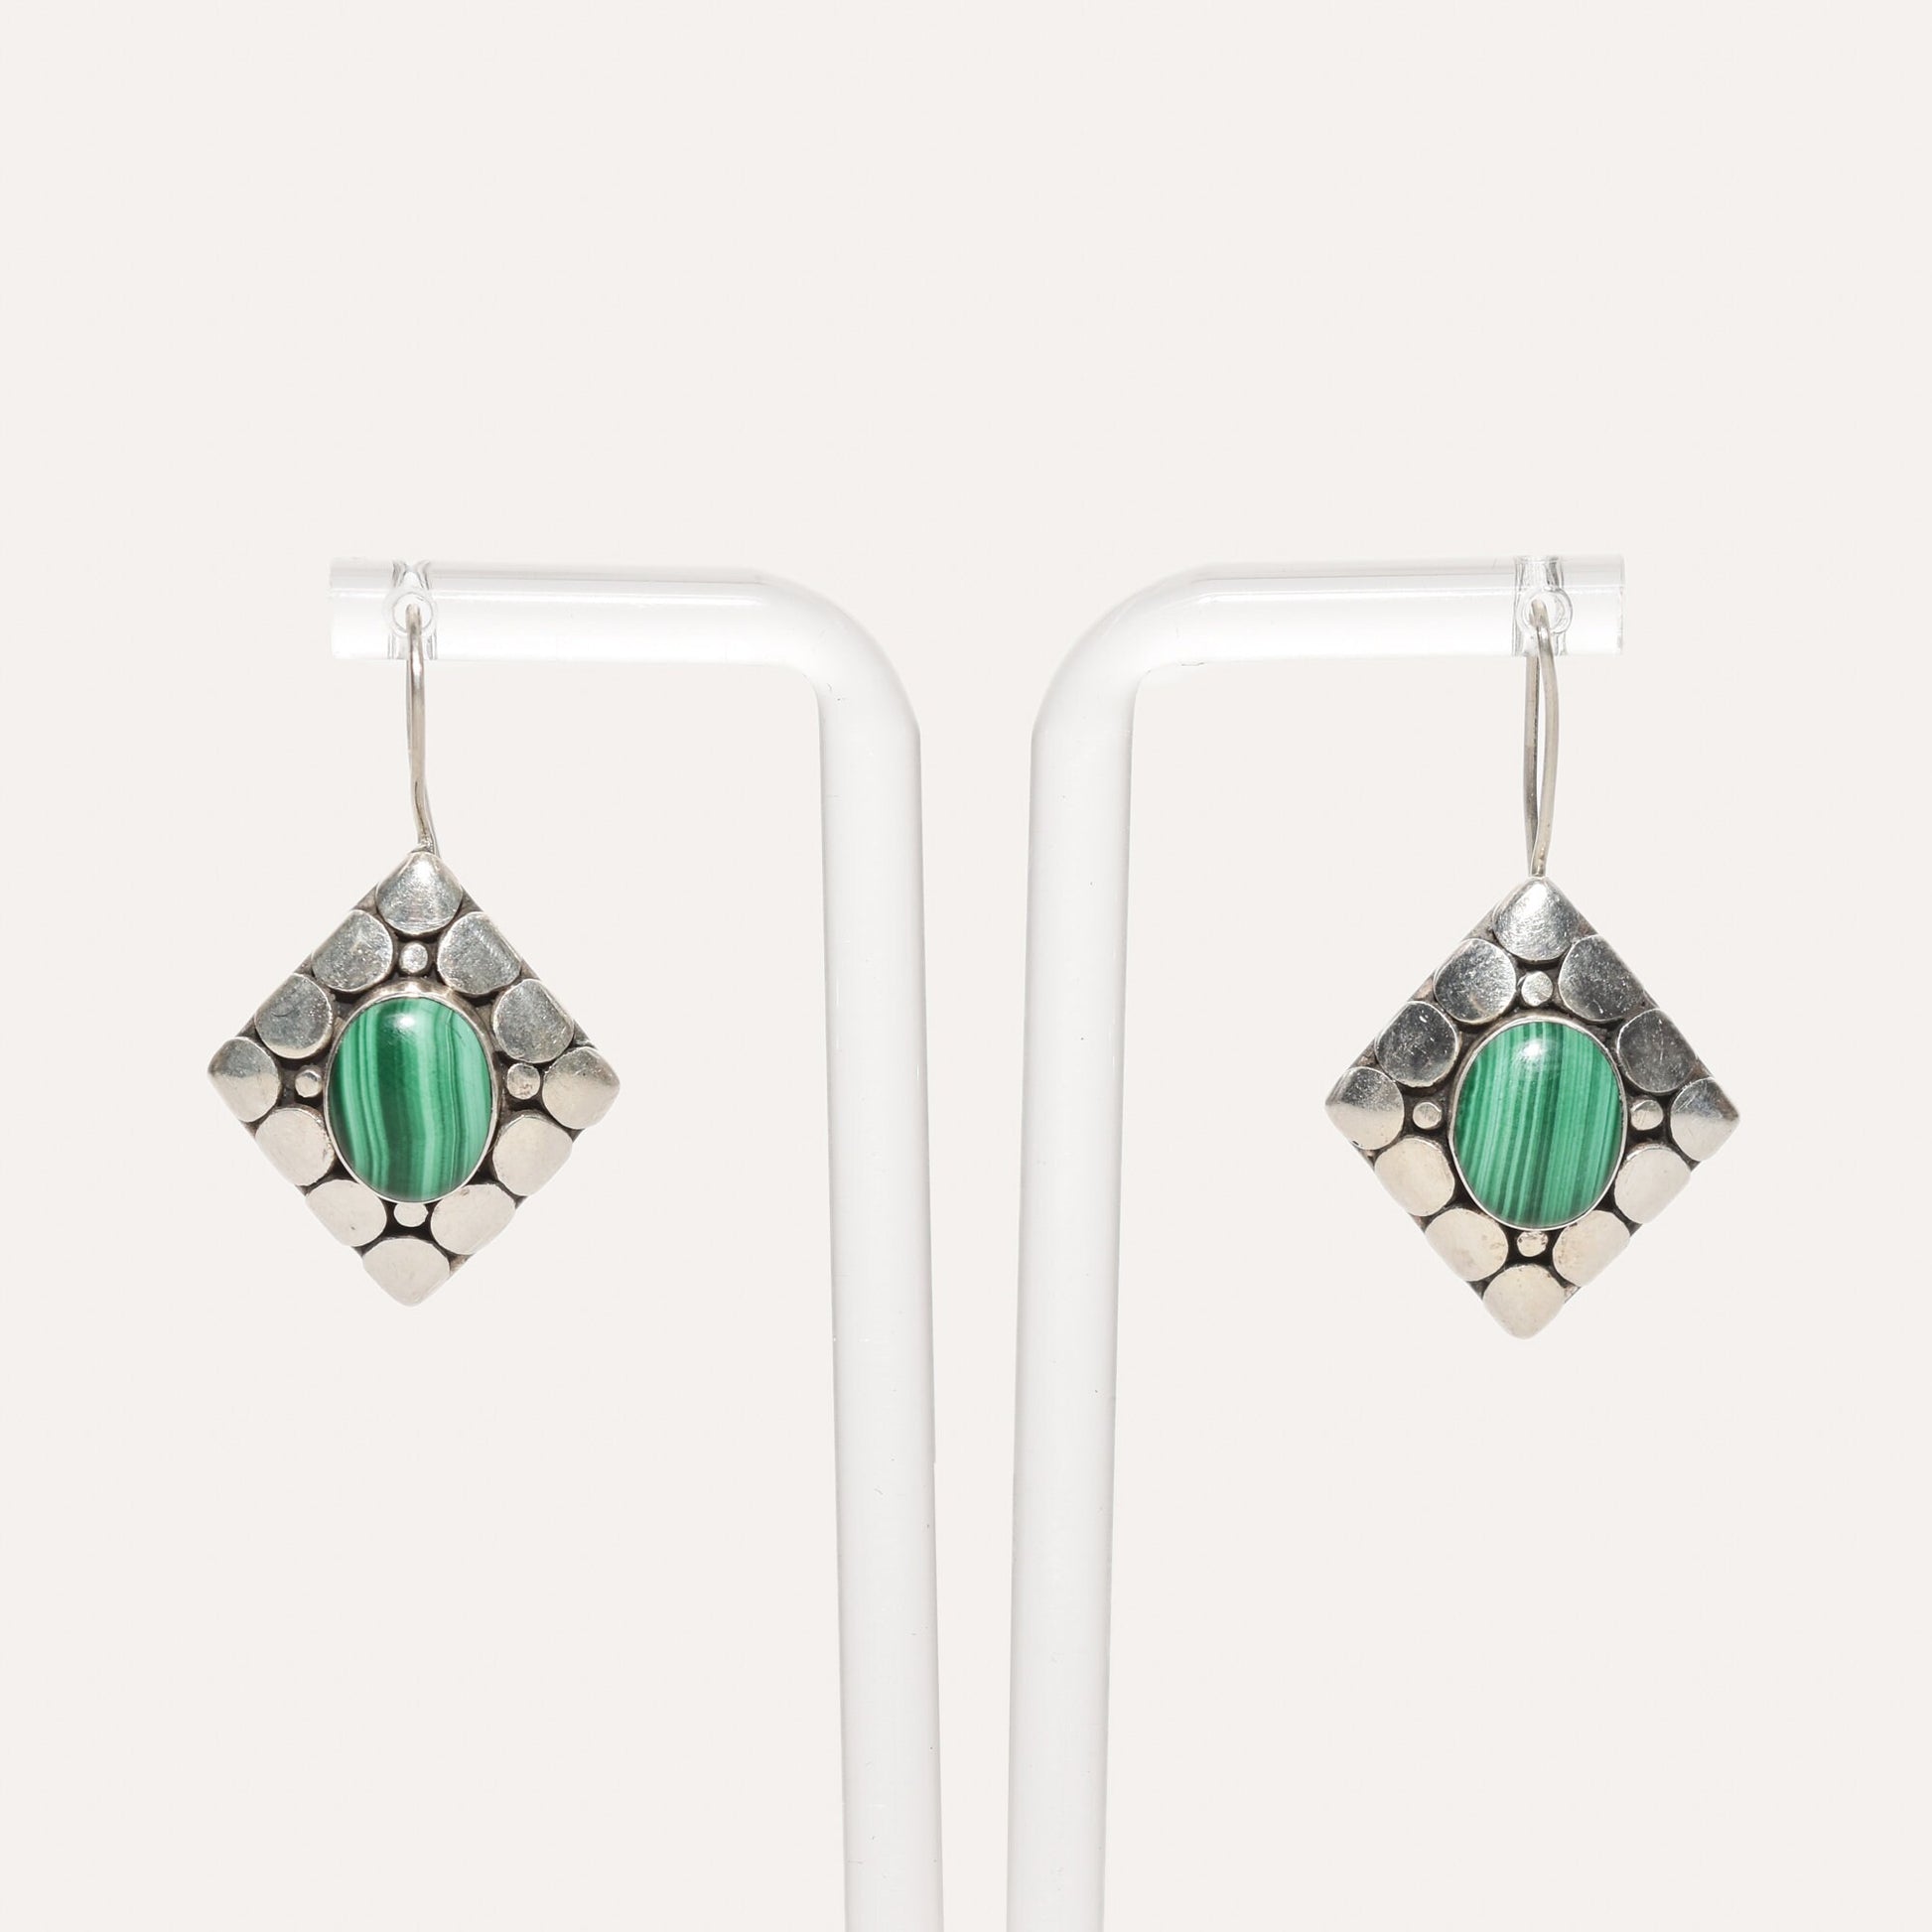 Modernist sterling silver malachite dangle earrings with cute gemstone design, 1.5 inch length, displayed against a white background.